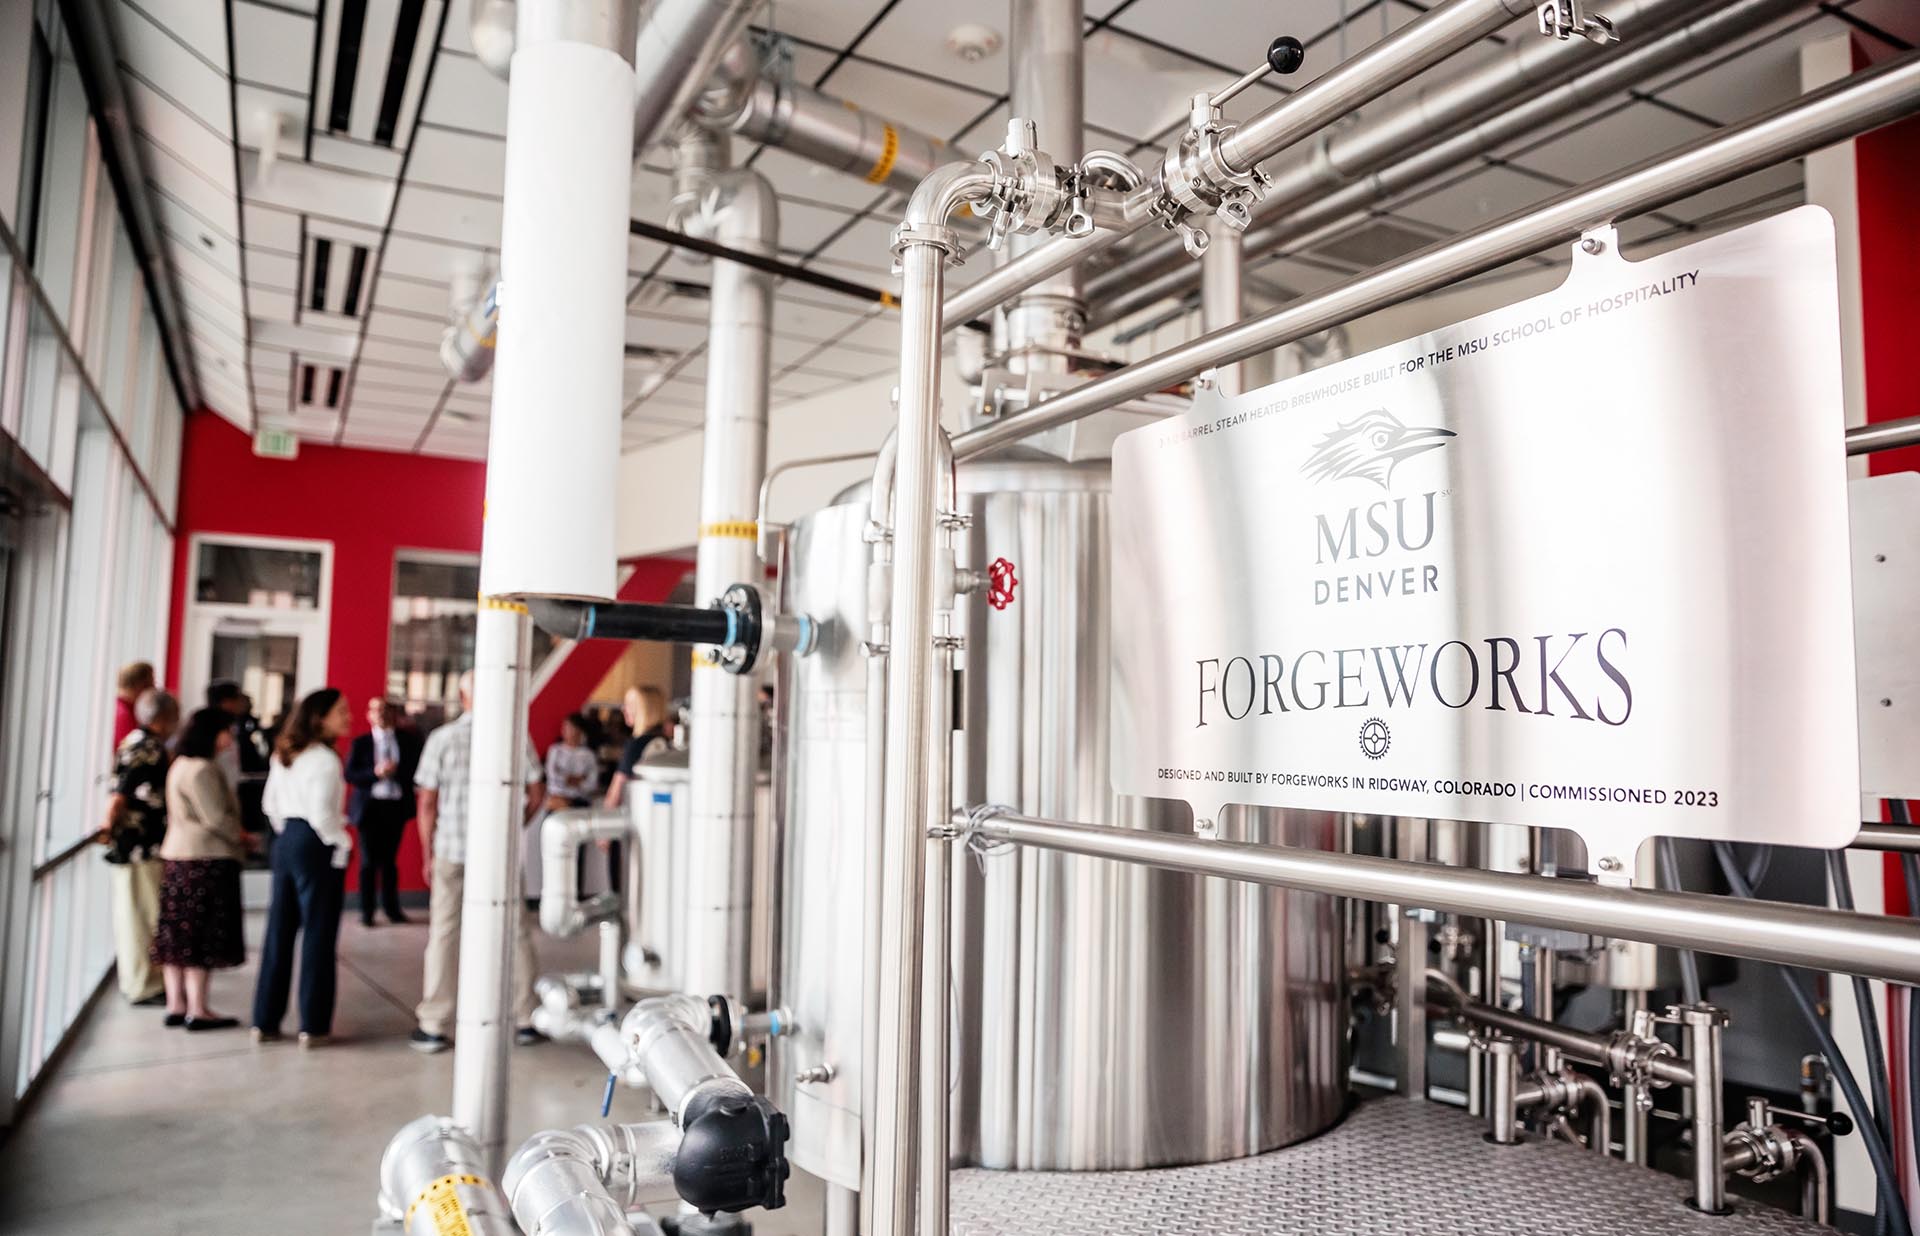 A look inside the new brewery education lab.